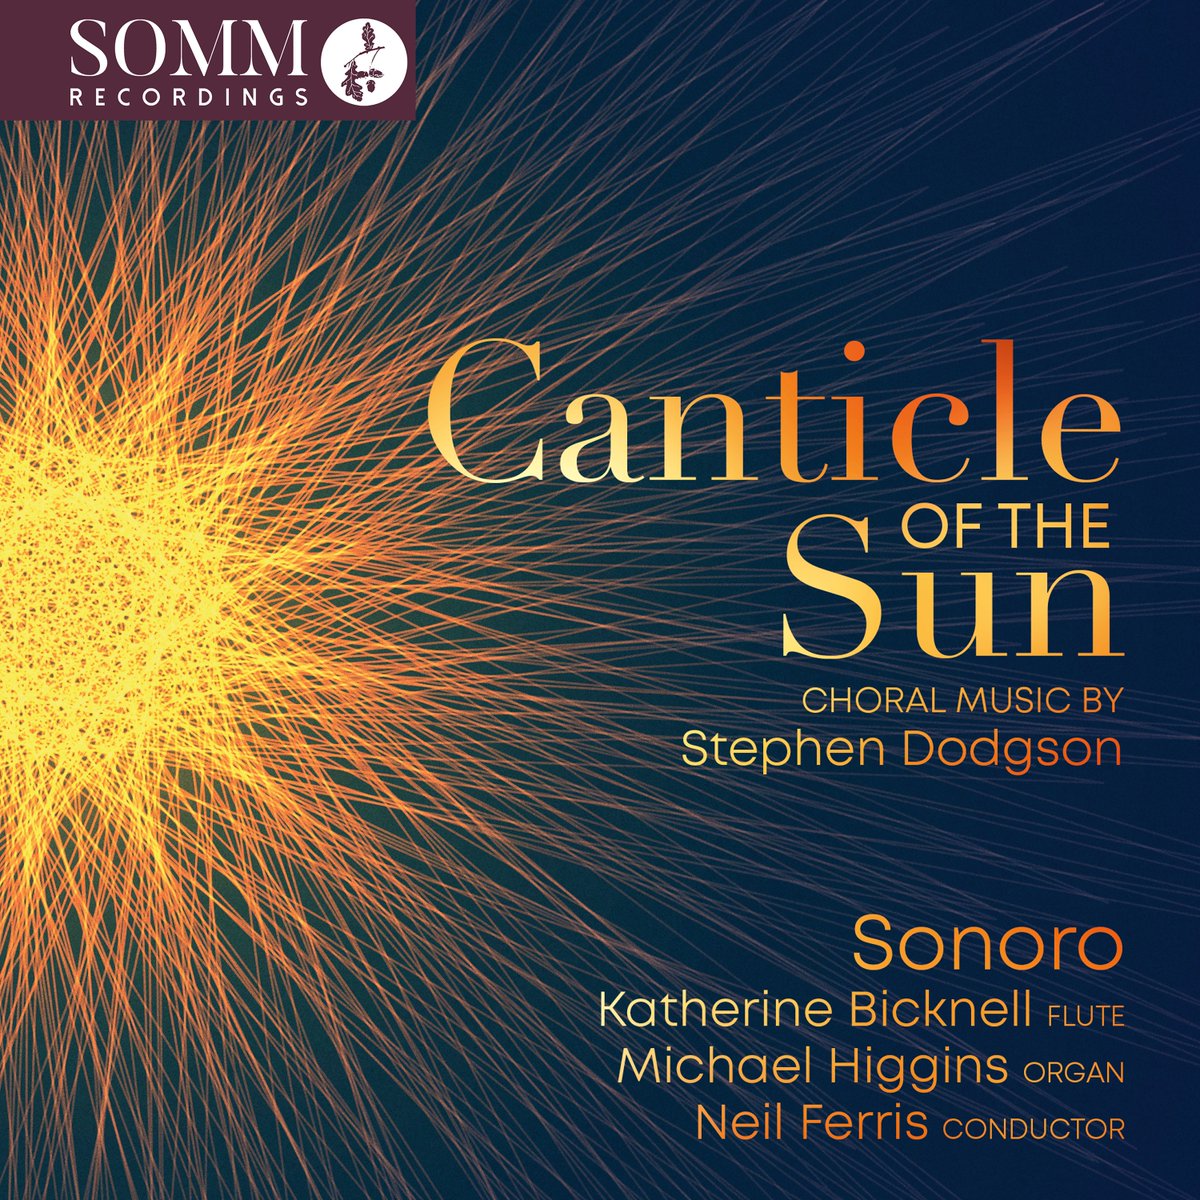 .@sonorochoir's Canticle of the Sun: Choral Music by Stephen Dodgson is #NowPlaying in @AppleClassical's Choral Chill, Sacred Sounds & New in Classical playlists! Sacred Sounds apple.co/3QWBmjY Choral Chill apple.co/3WLjT1U New in Classical apple.co/3SJJ3Mk